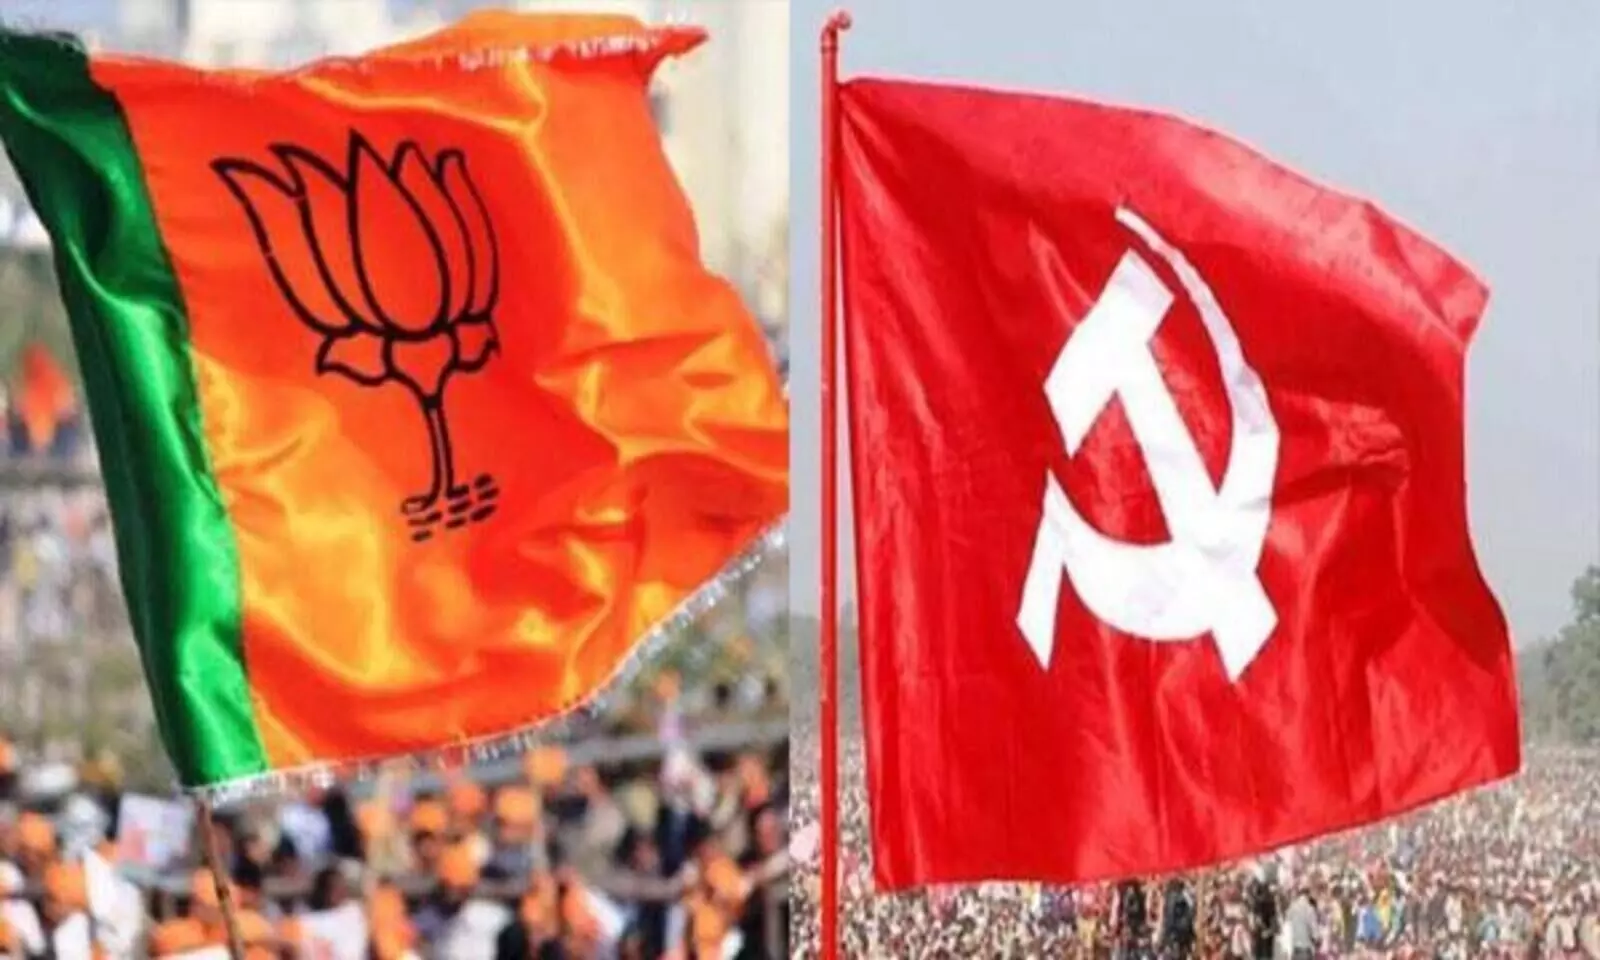 cpm workers attacked in petta, two bjp workers in custody